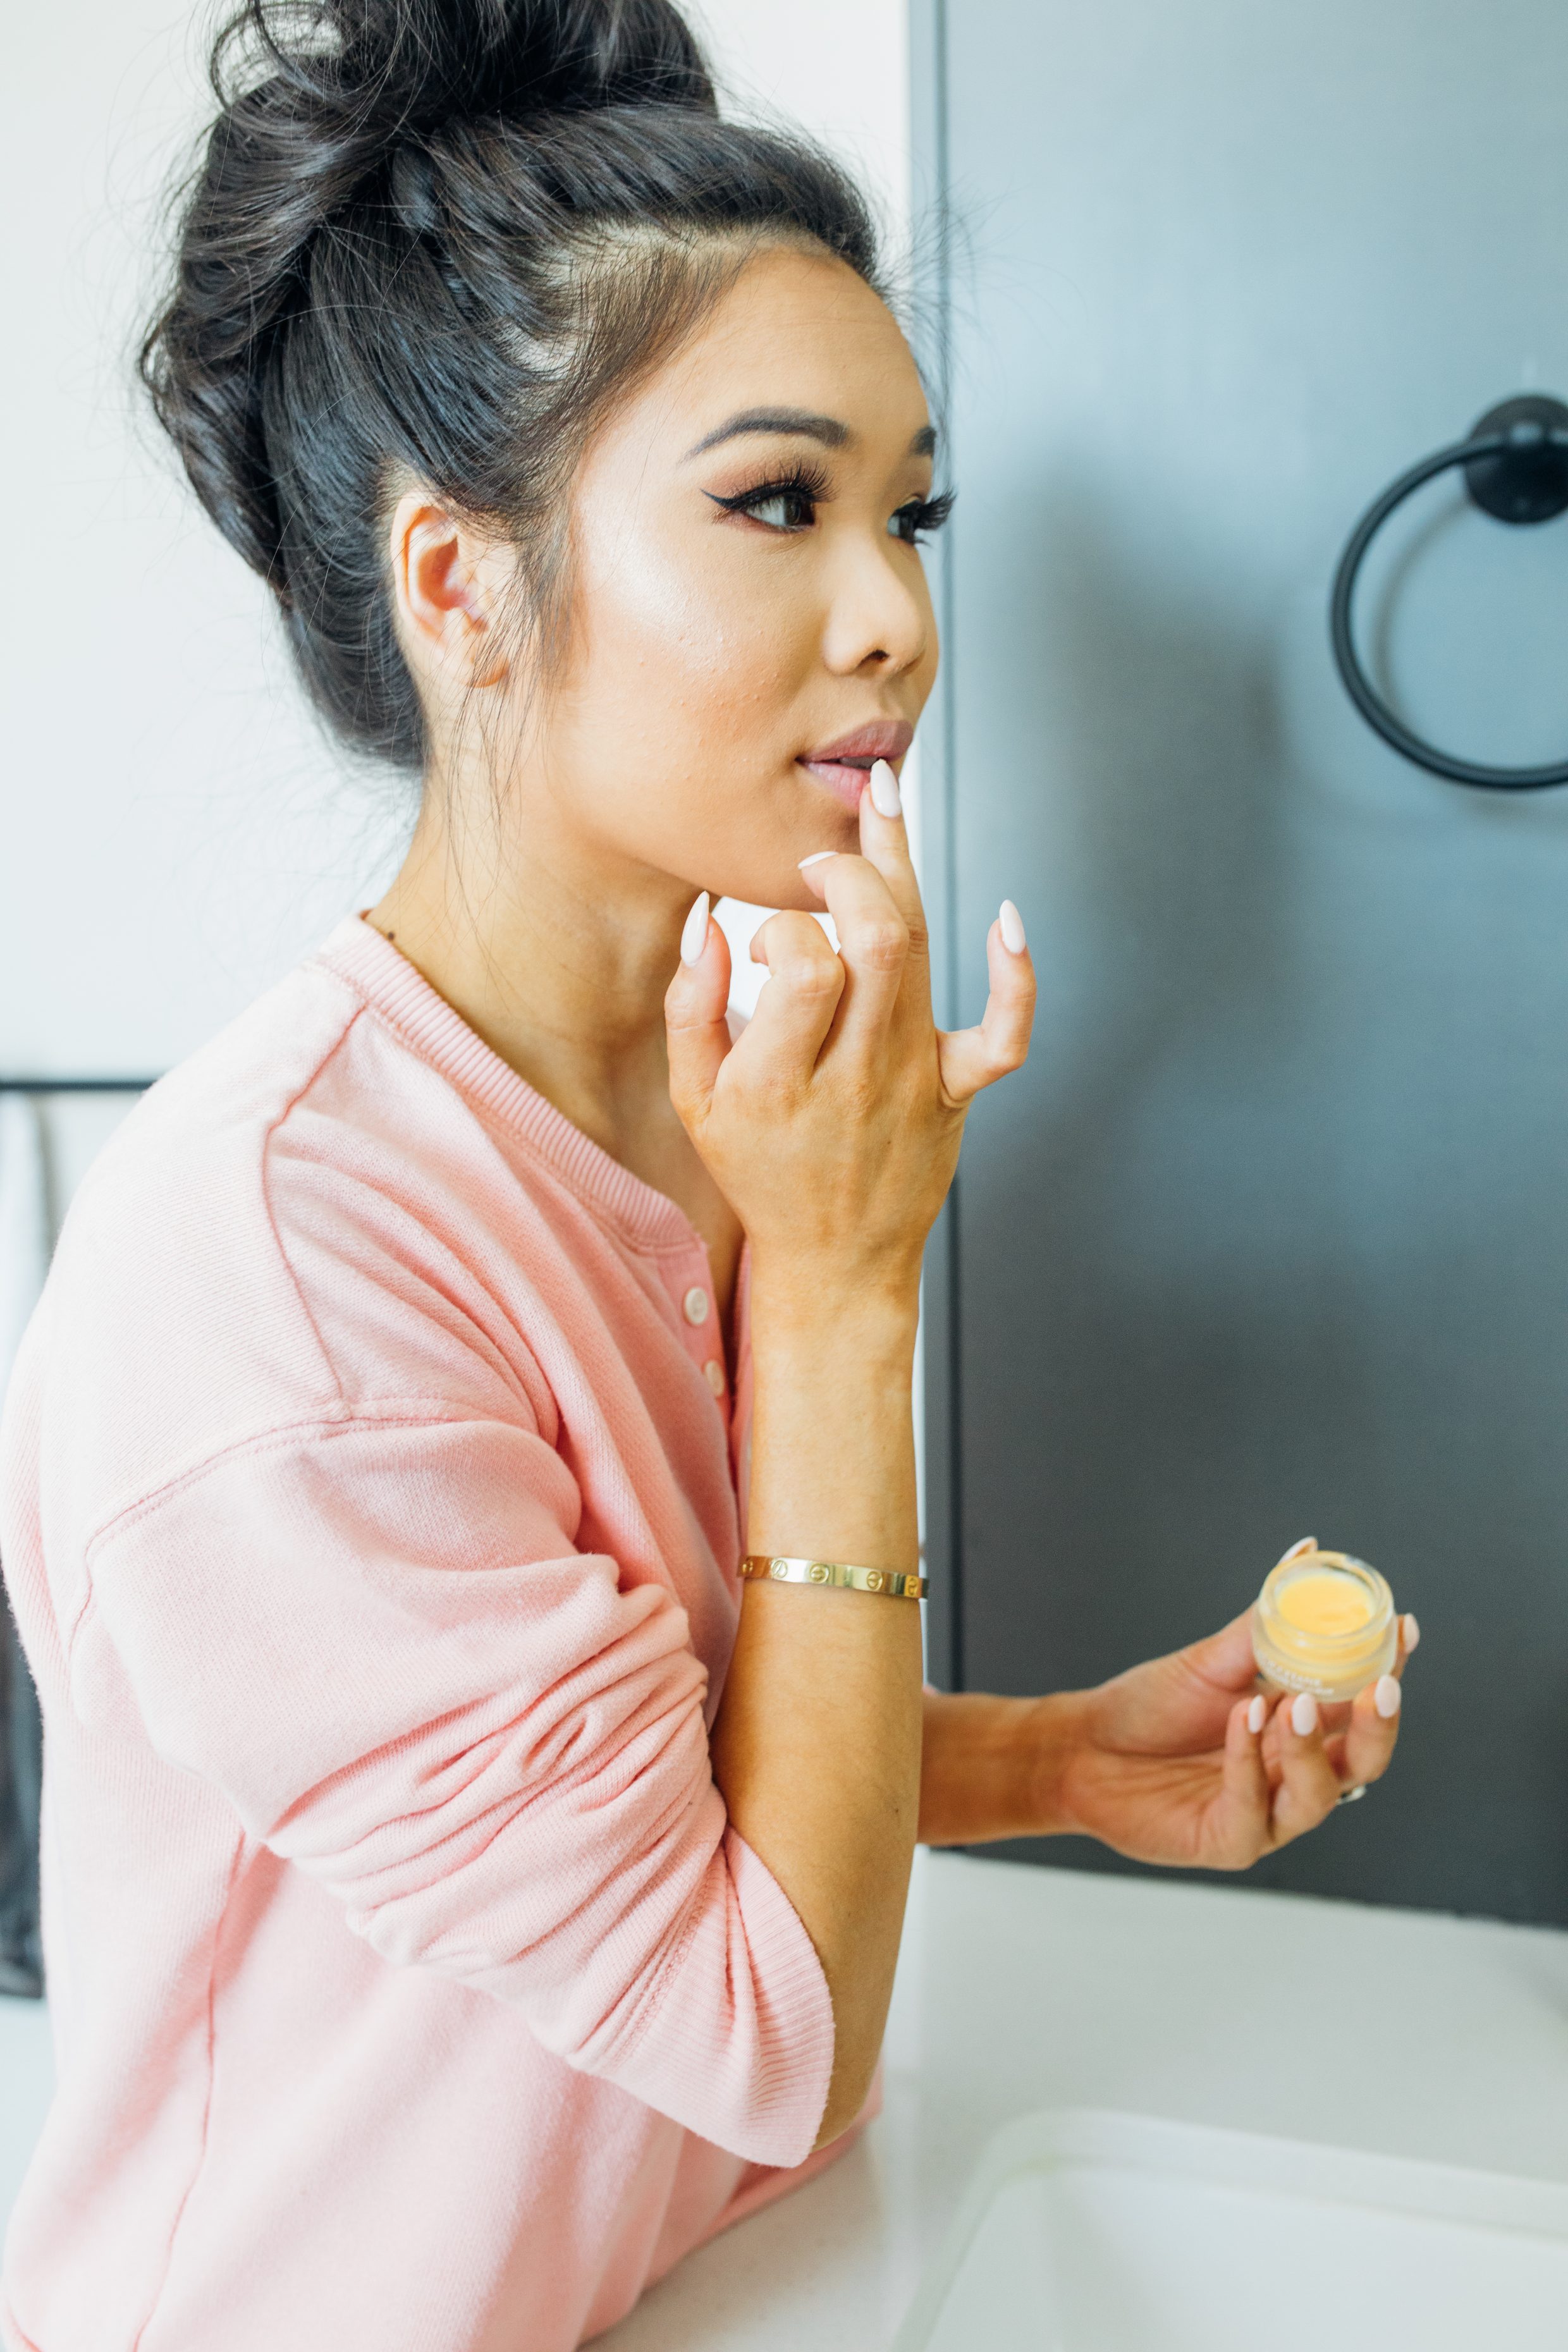 Blogger Hoang-Kim shares how she keeps her lips soft and smooth using L'Occitane